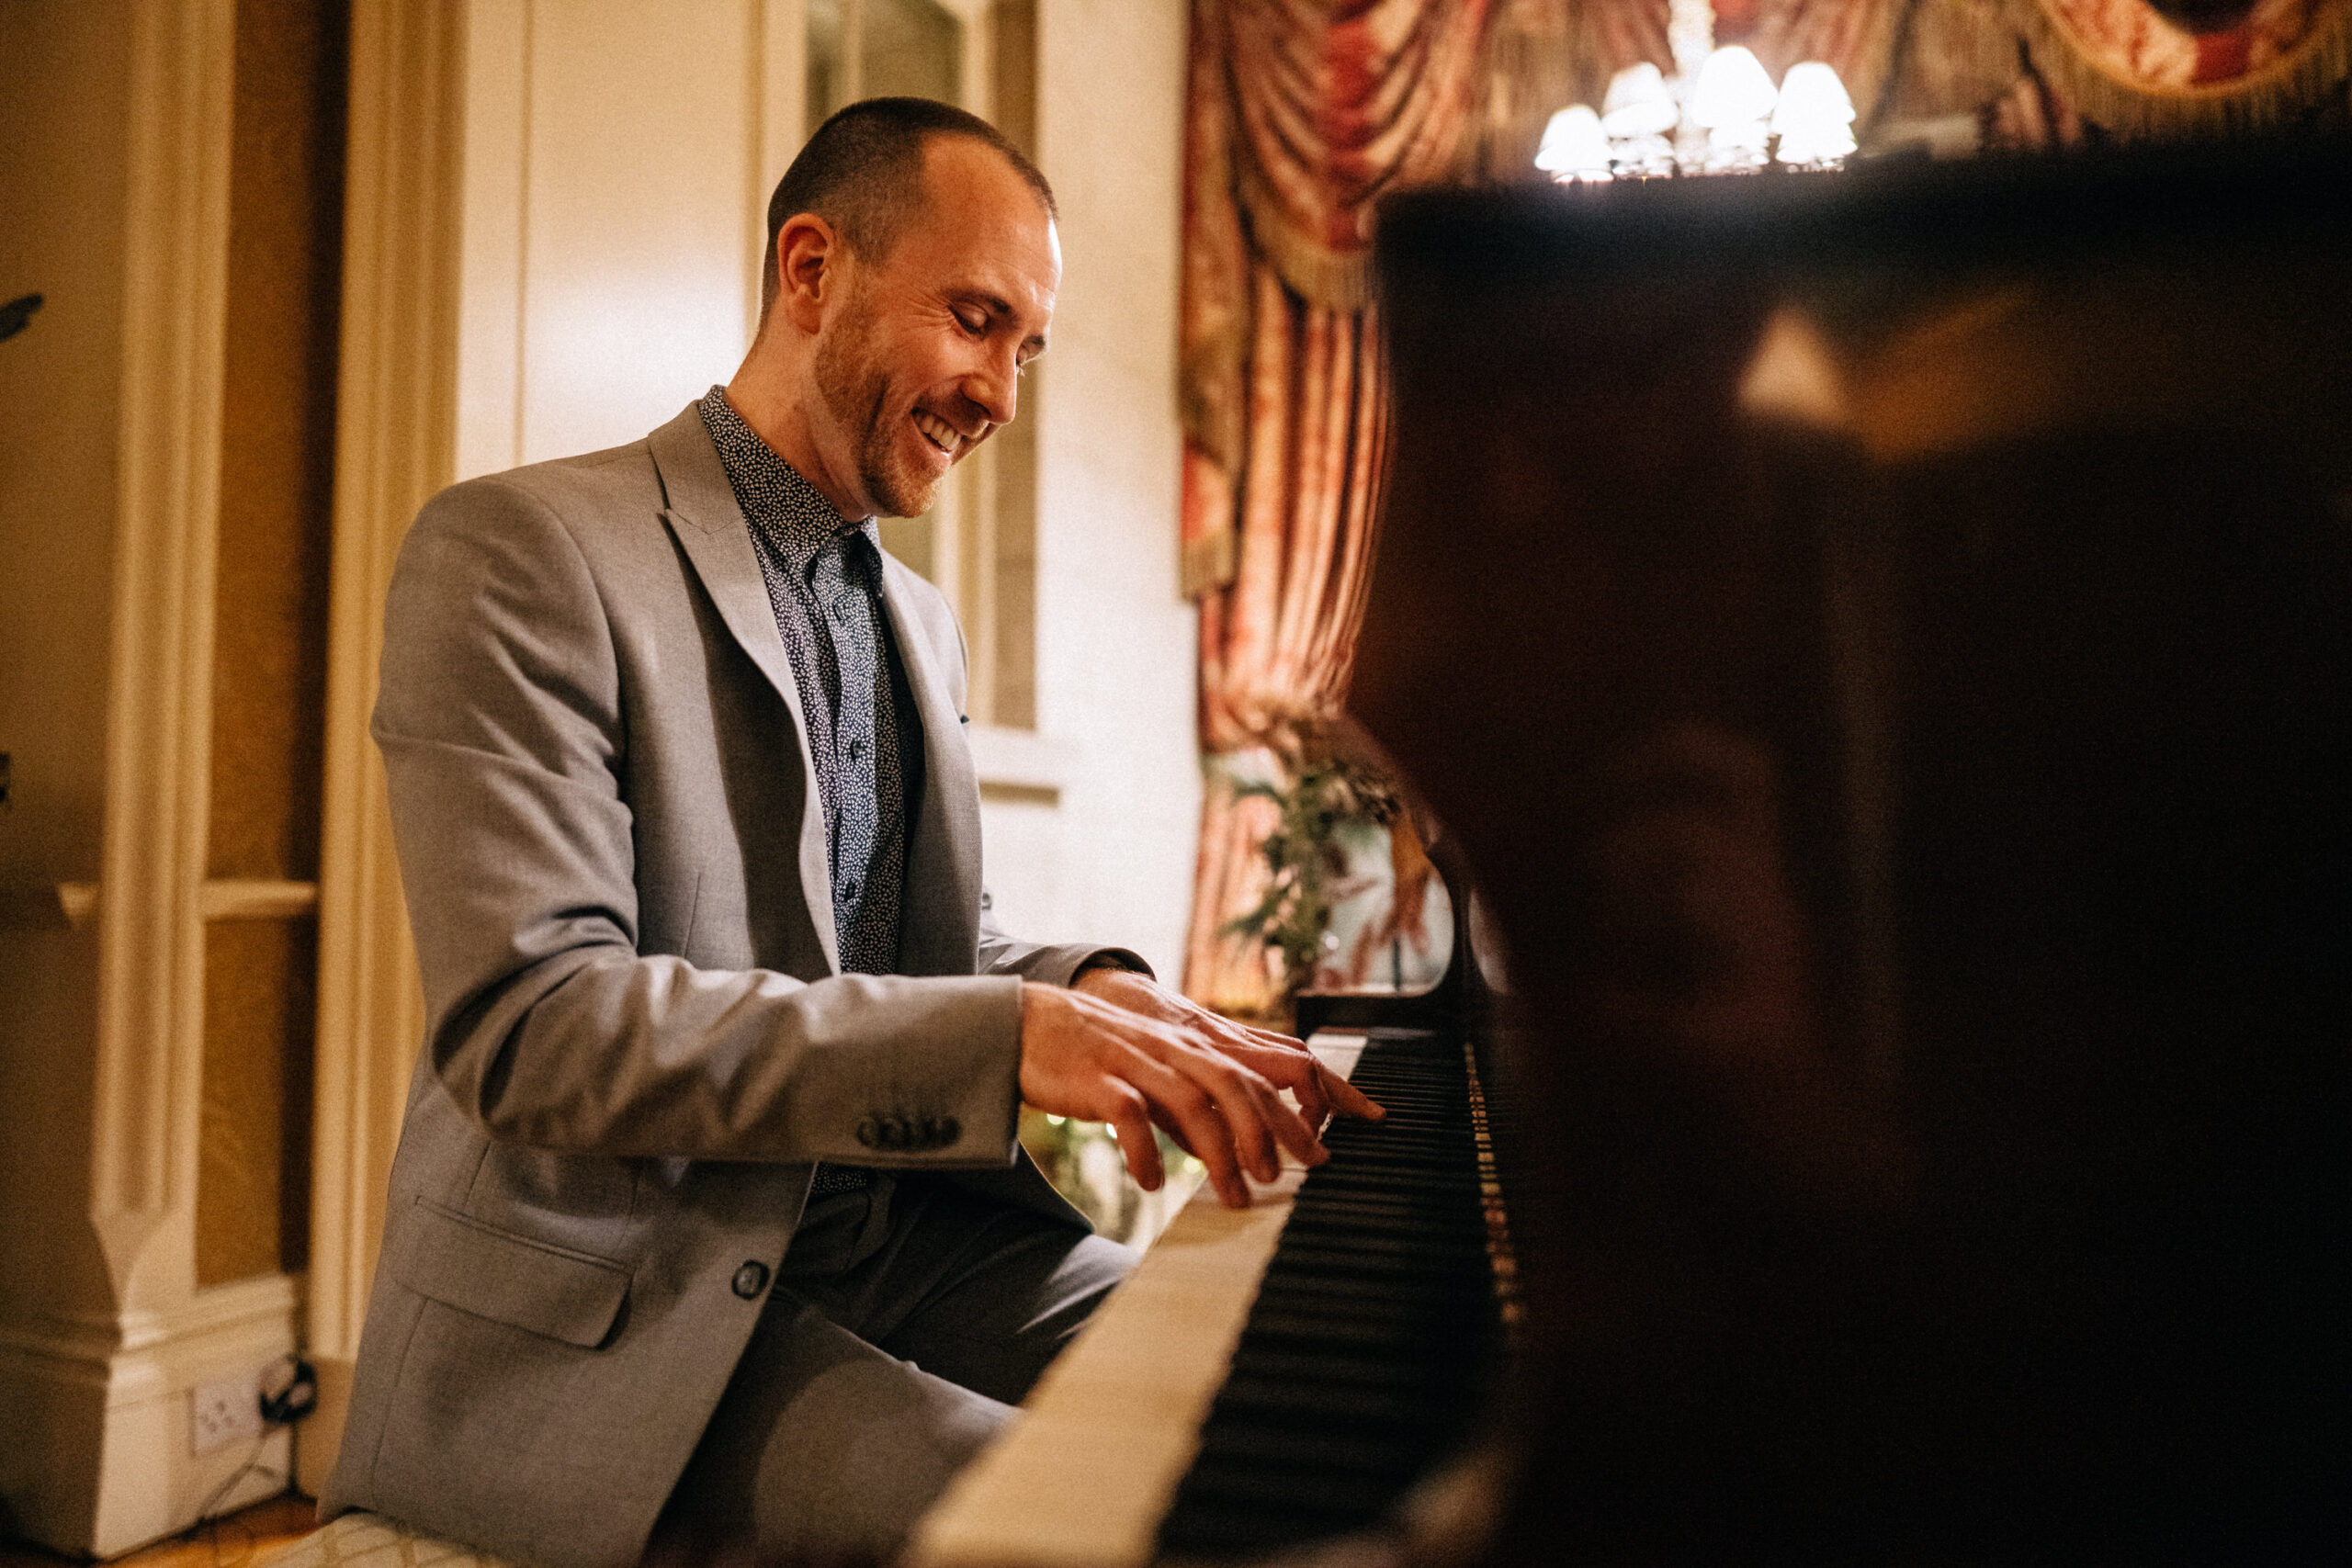 Joe Kenny playing baby grand piano In Tankardstown House Co Meath